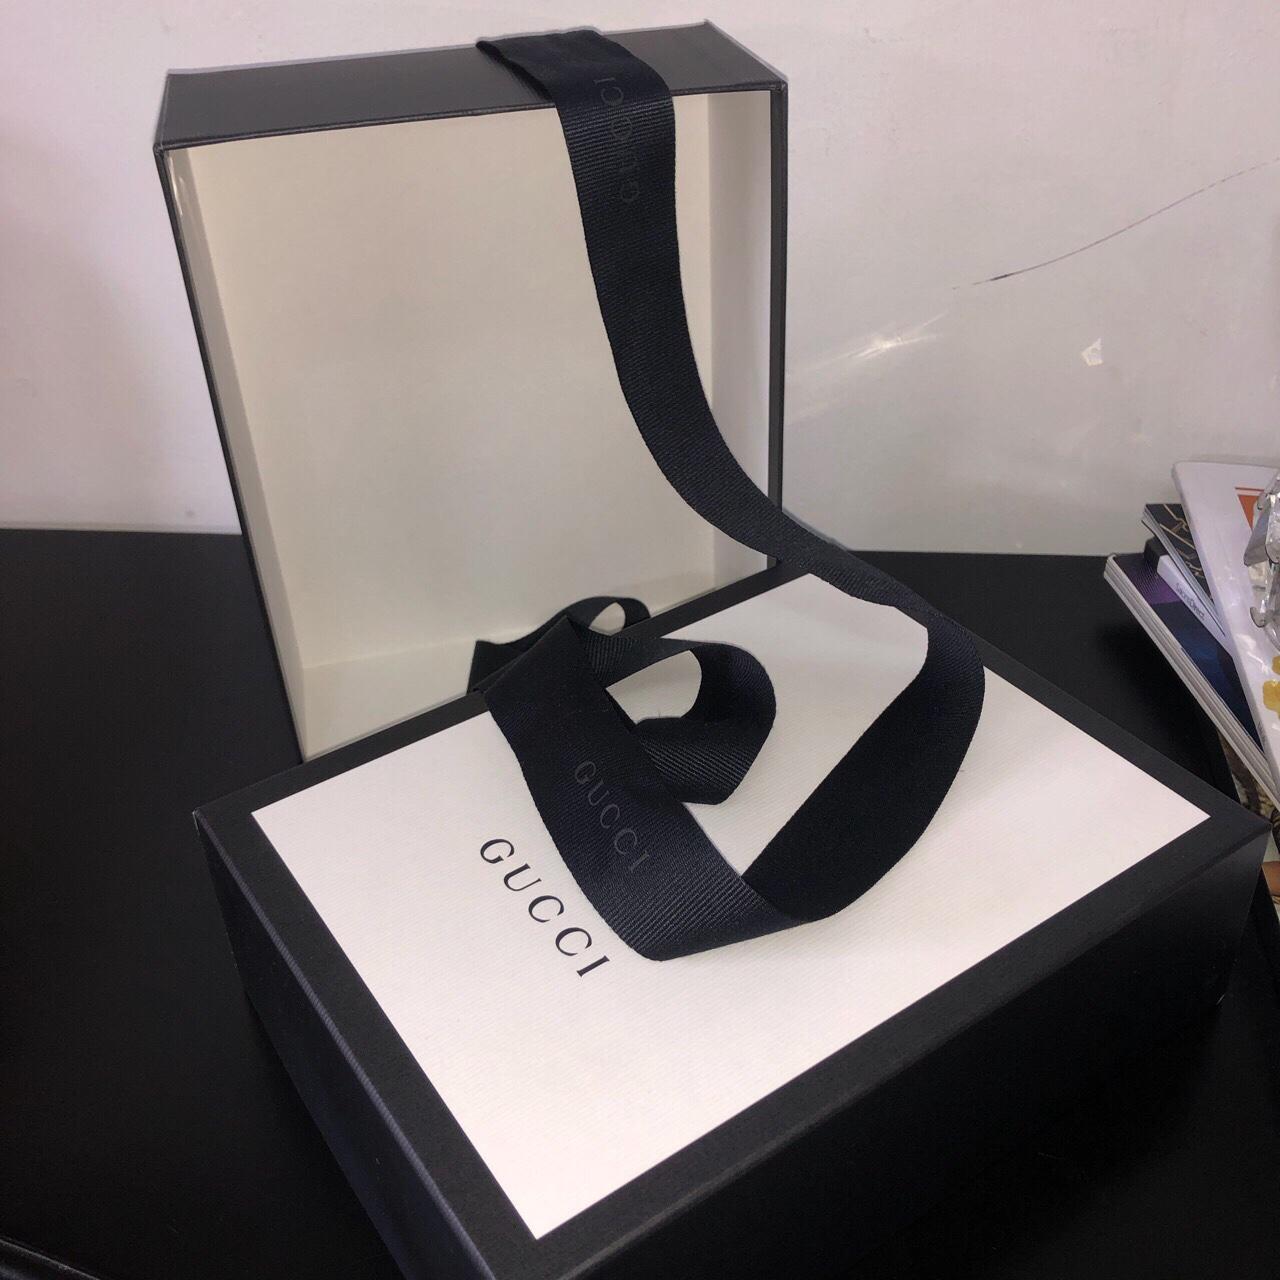 Gucci Shoes Empty Gift Box 15” x 11” x 7.5” + Extras! Tissue and Ribbon